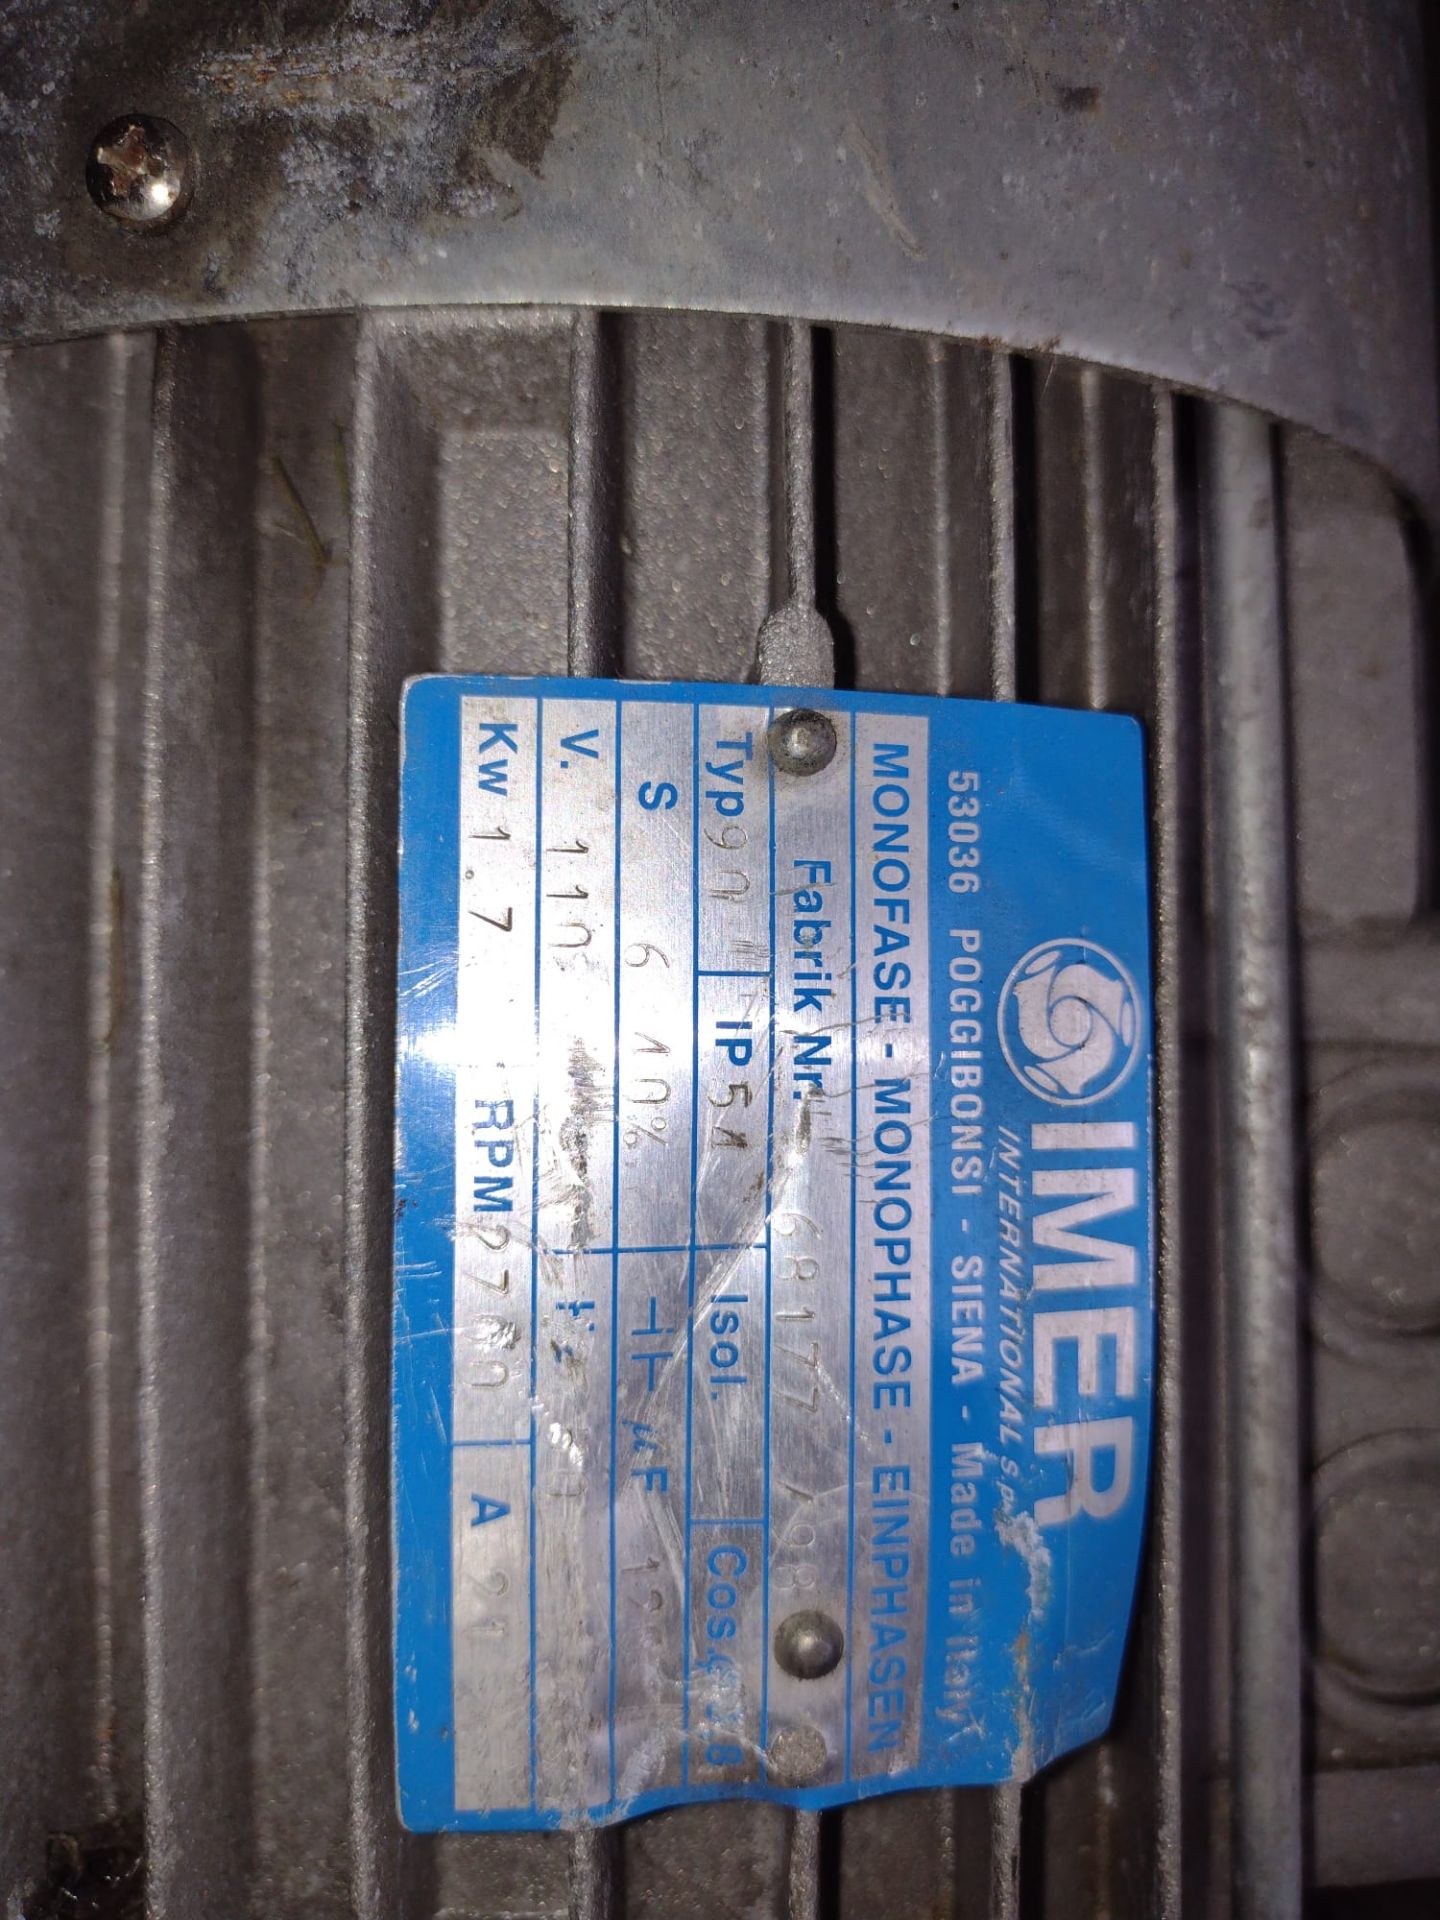 4x 110 motors some immer for scaffolding hoists untested but in good condition 1 or 2 *NO VAT* - Image 3 of 10